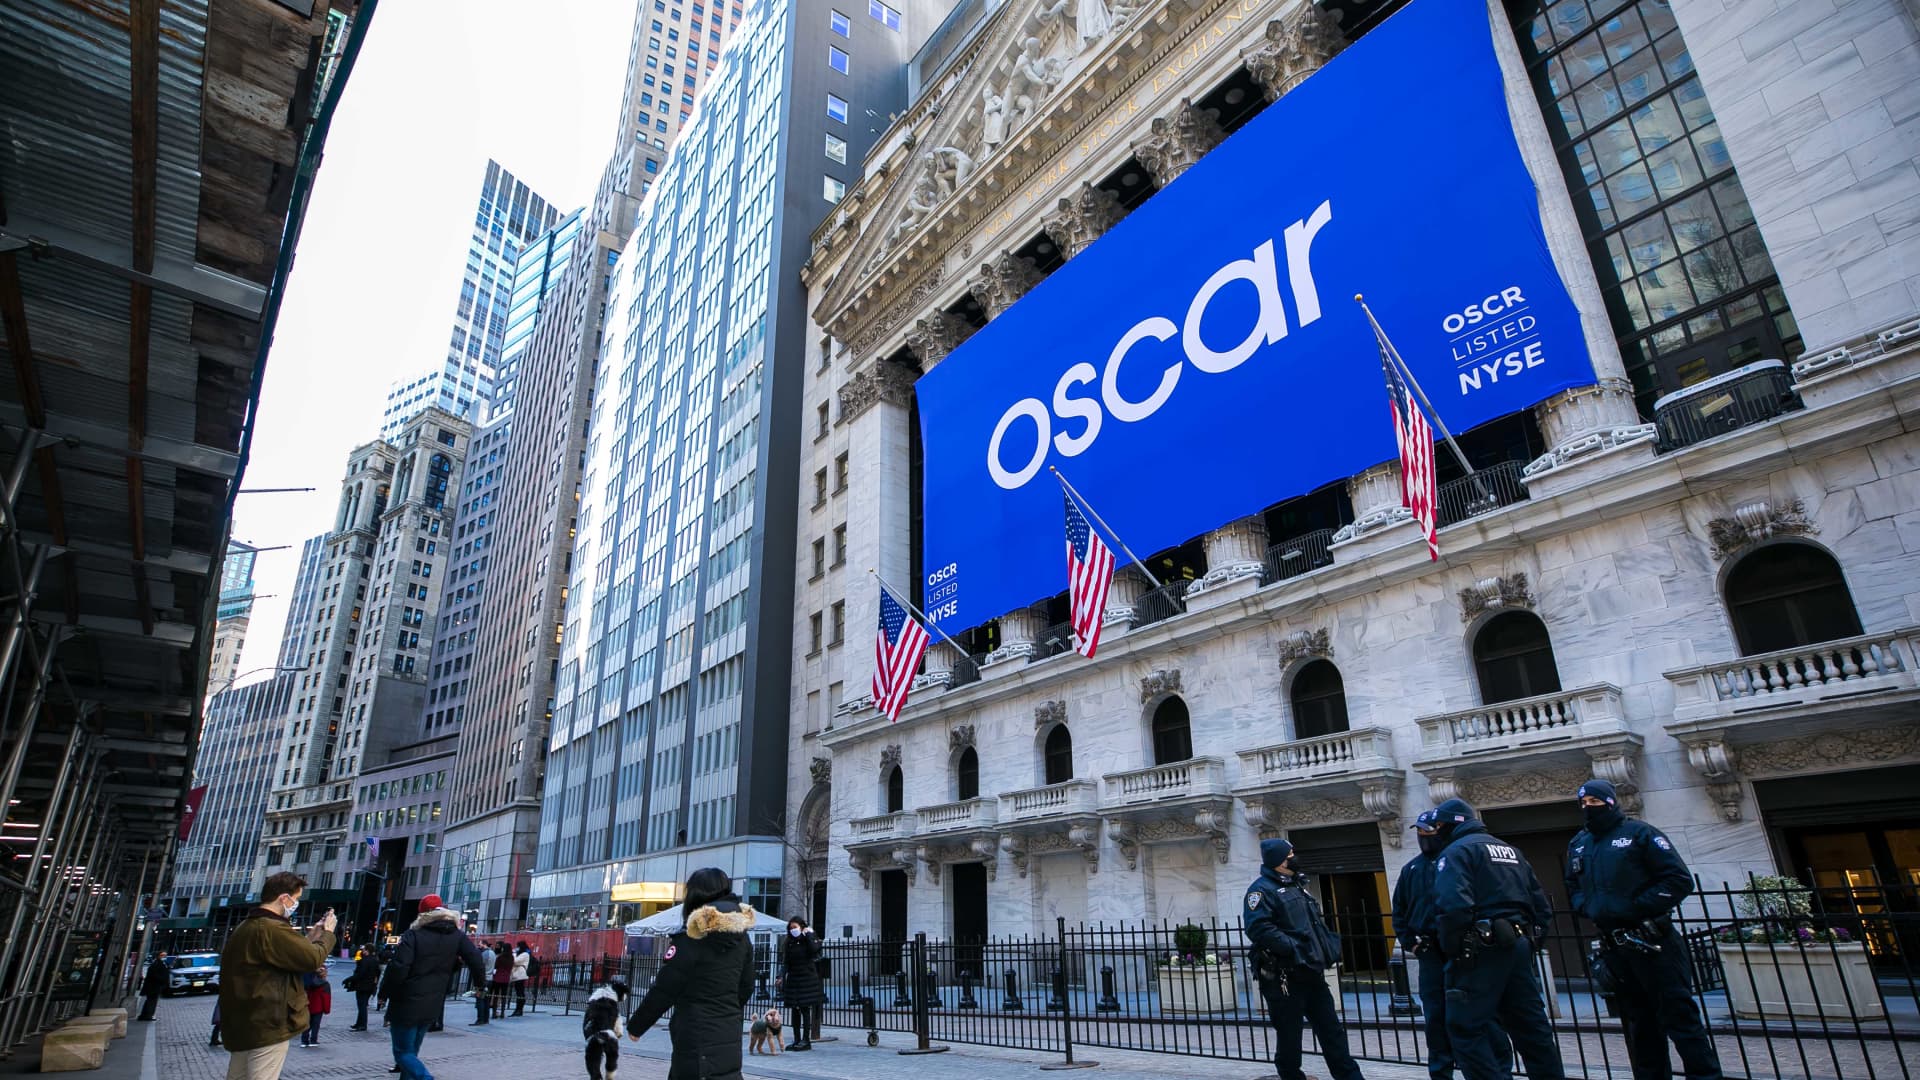 Insurance stock Oscar Health is a buy and can jump nearly 40%, Wells Fargo says in upgrade